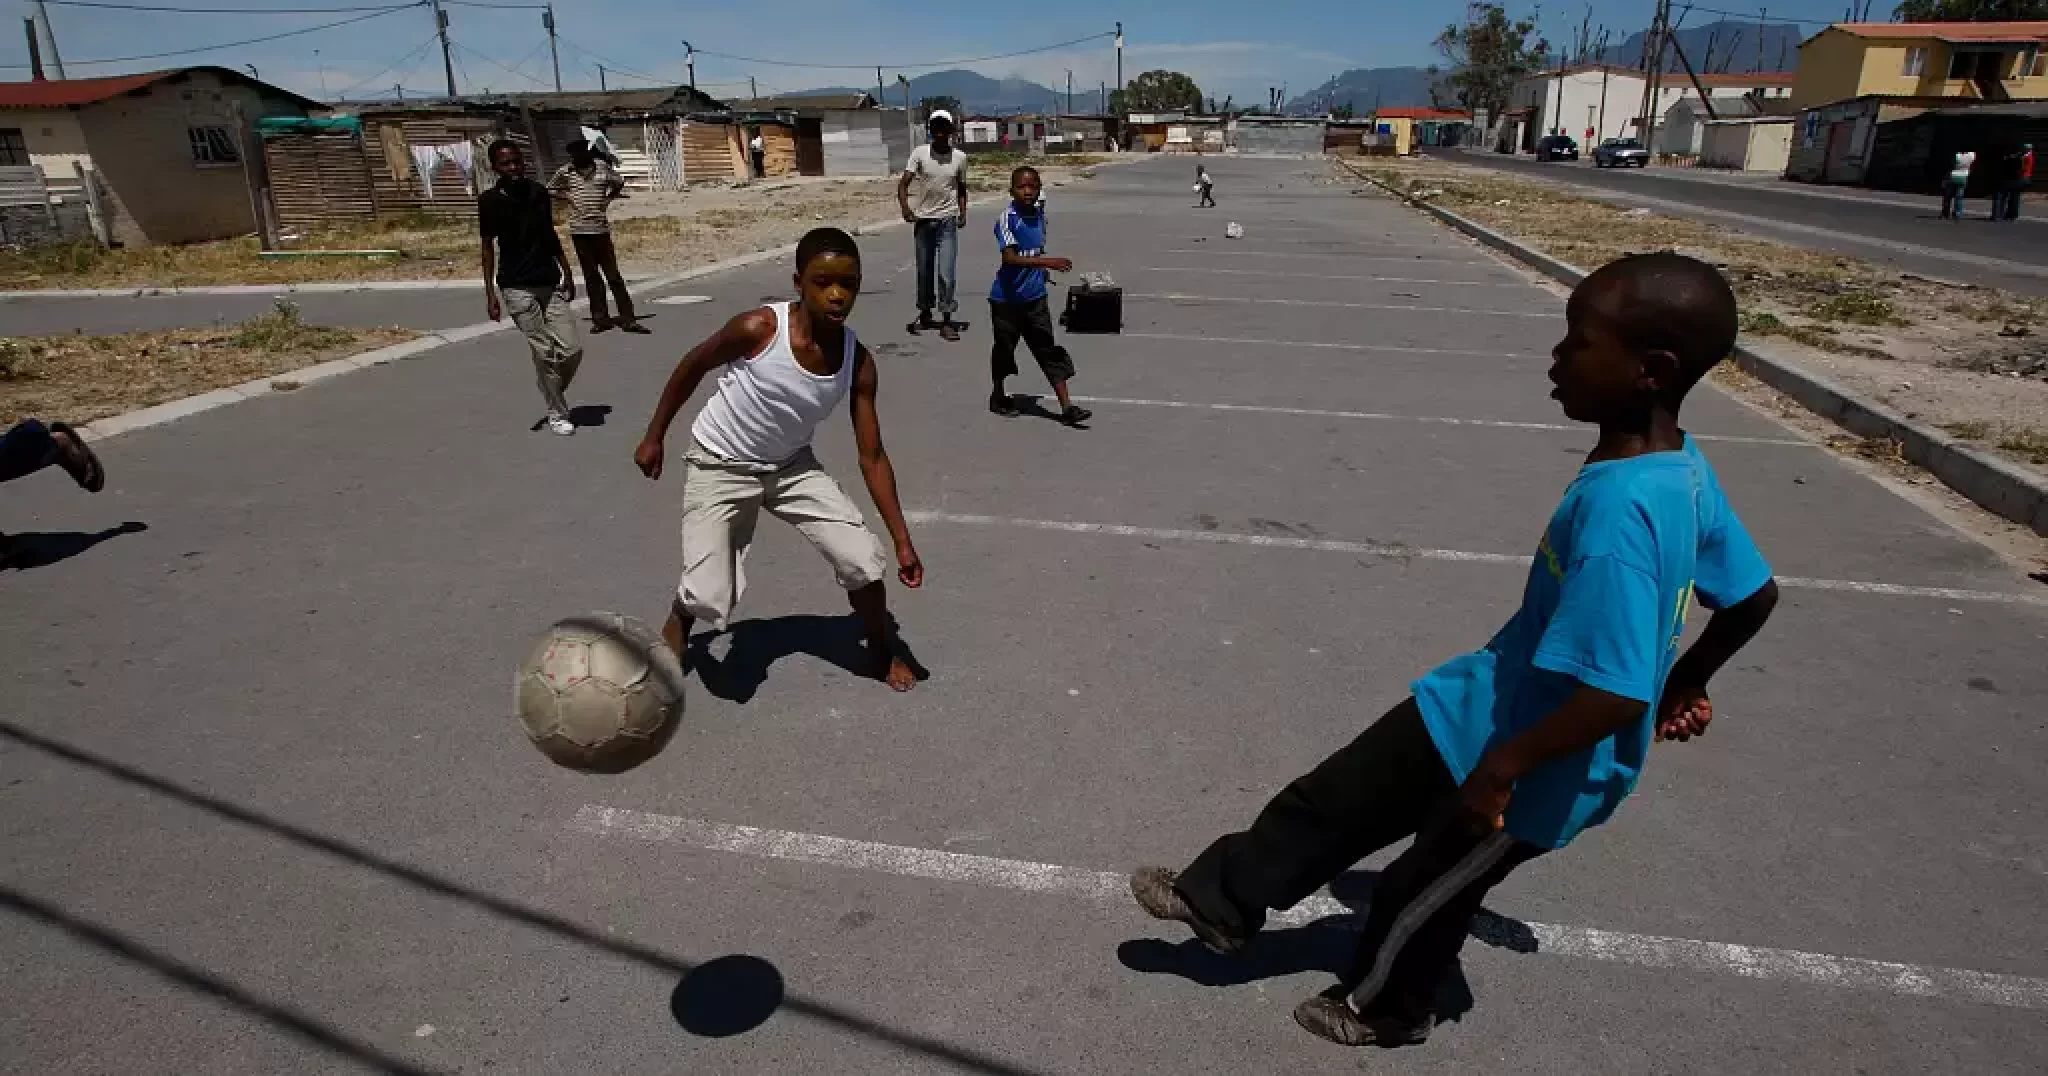 Street Child FIFA World Cup 2022 aims to change perceptions